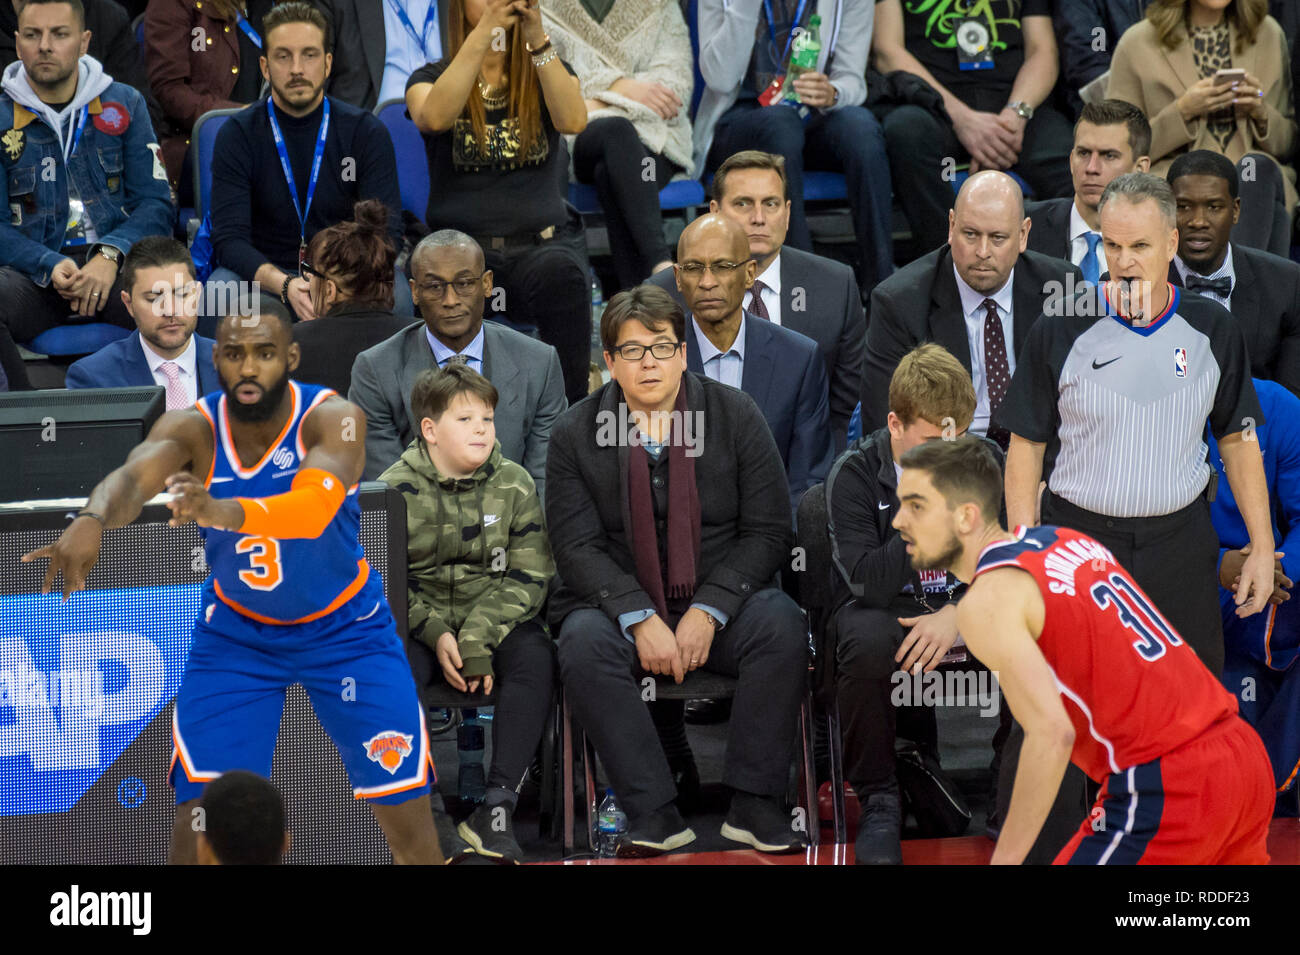 Londo , UK.  17 January 2019. Michael McIntyre (C) and his son Ossie watch an NBA basketball game, NBA London 2019, between Washington Wizards and New York Knicks at the O2 Arena.  Final score: Wizards 101 Knicks 100.  Credit: Stephen Chung / Alamy Live News Stock Photo